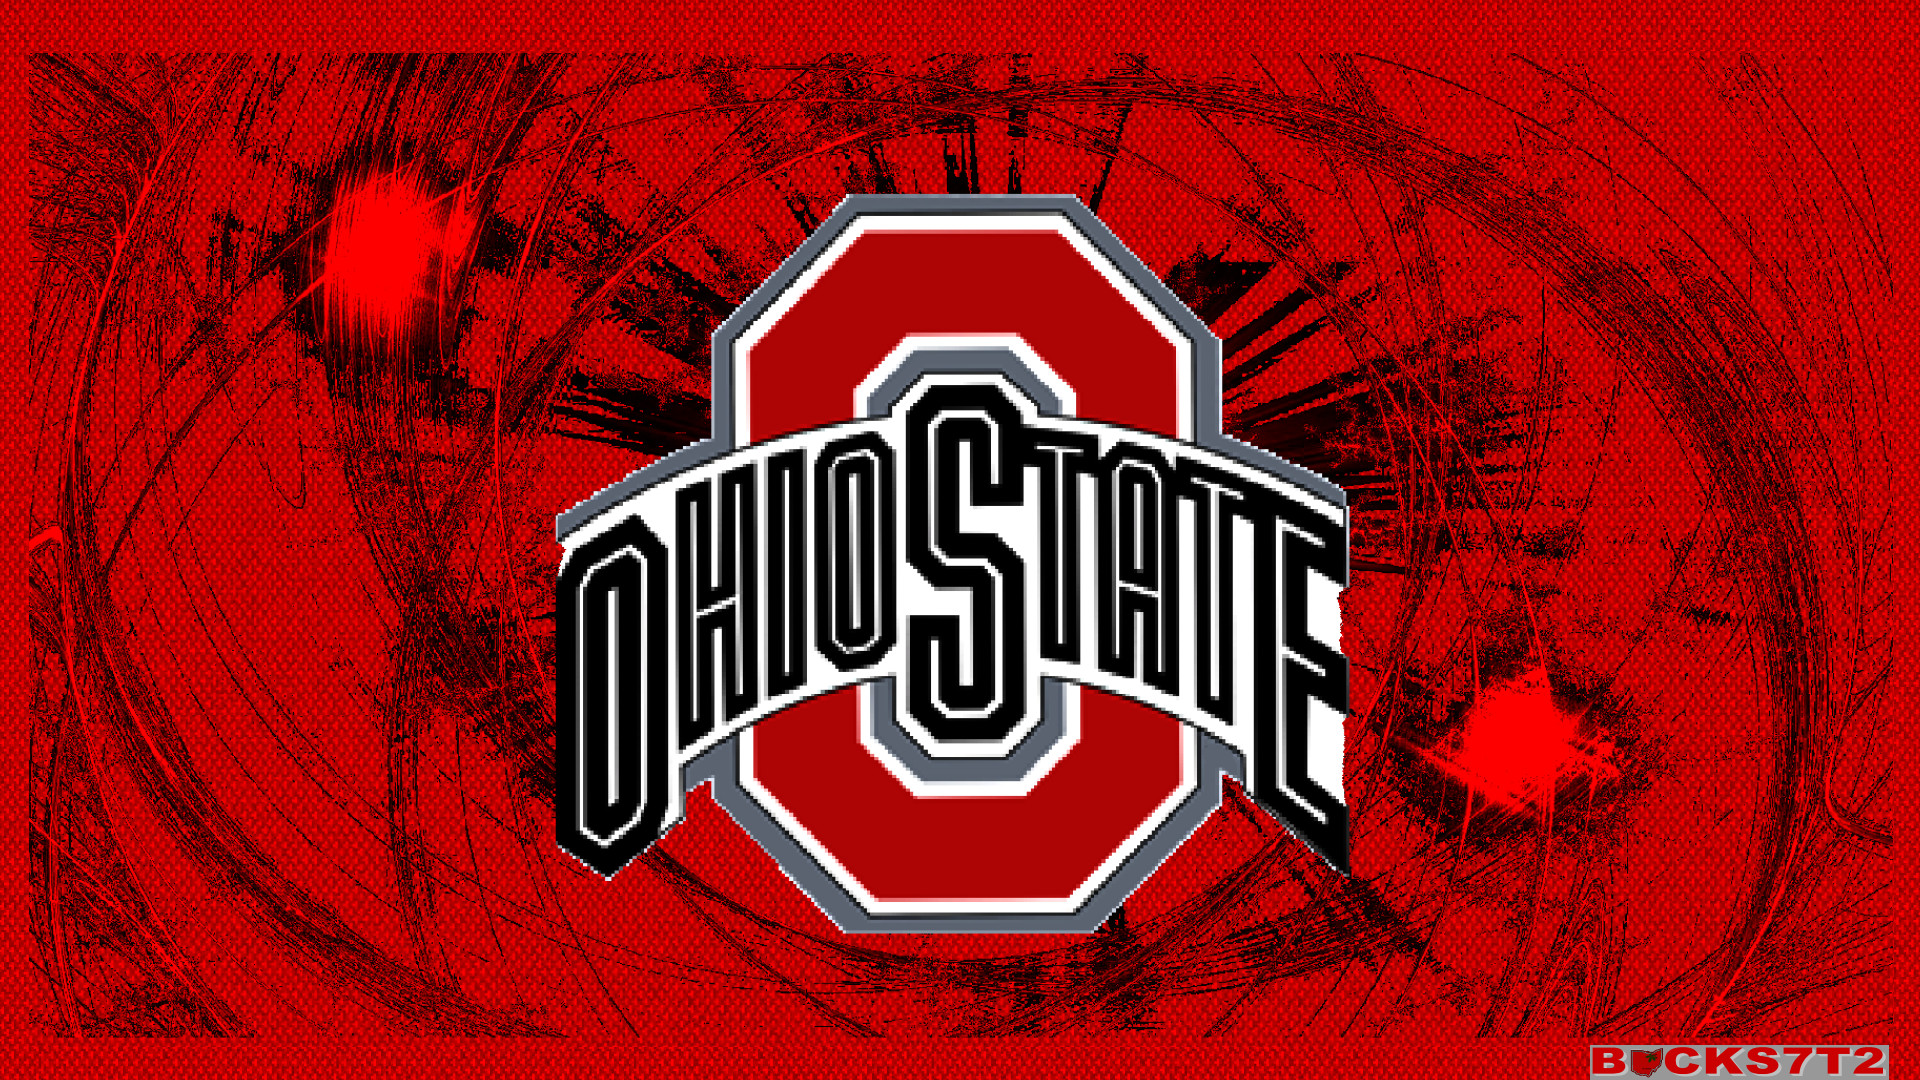 1920x1080 Free Fantastic Ohio State Buckeyes HD Images, Cammy Collinsworth